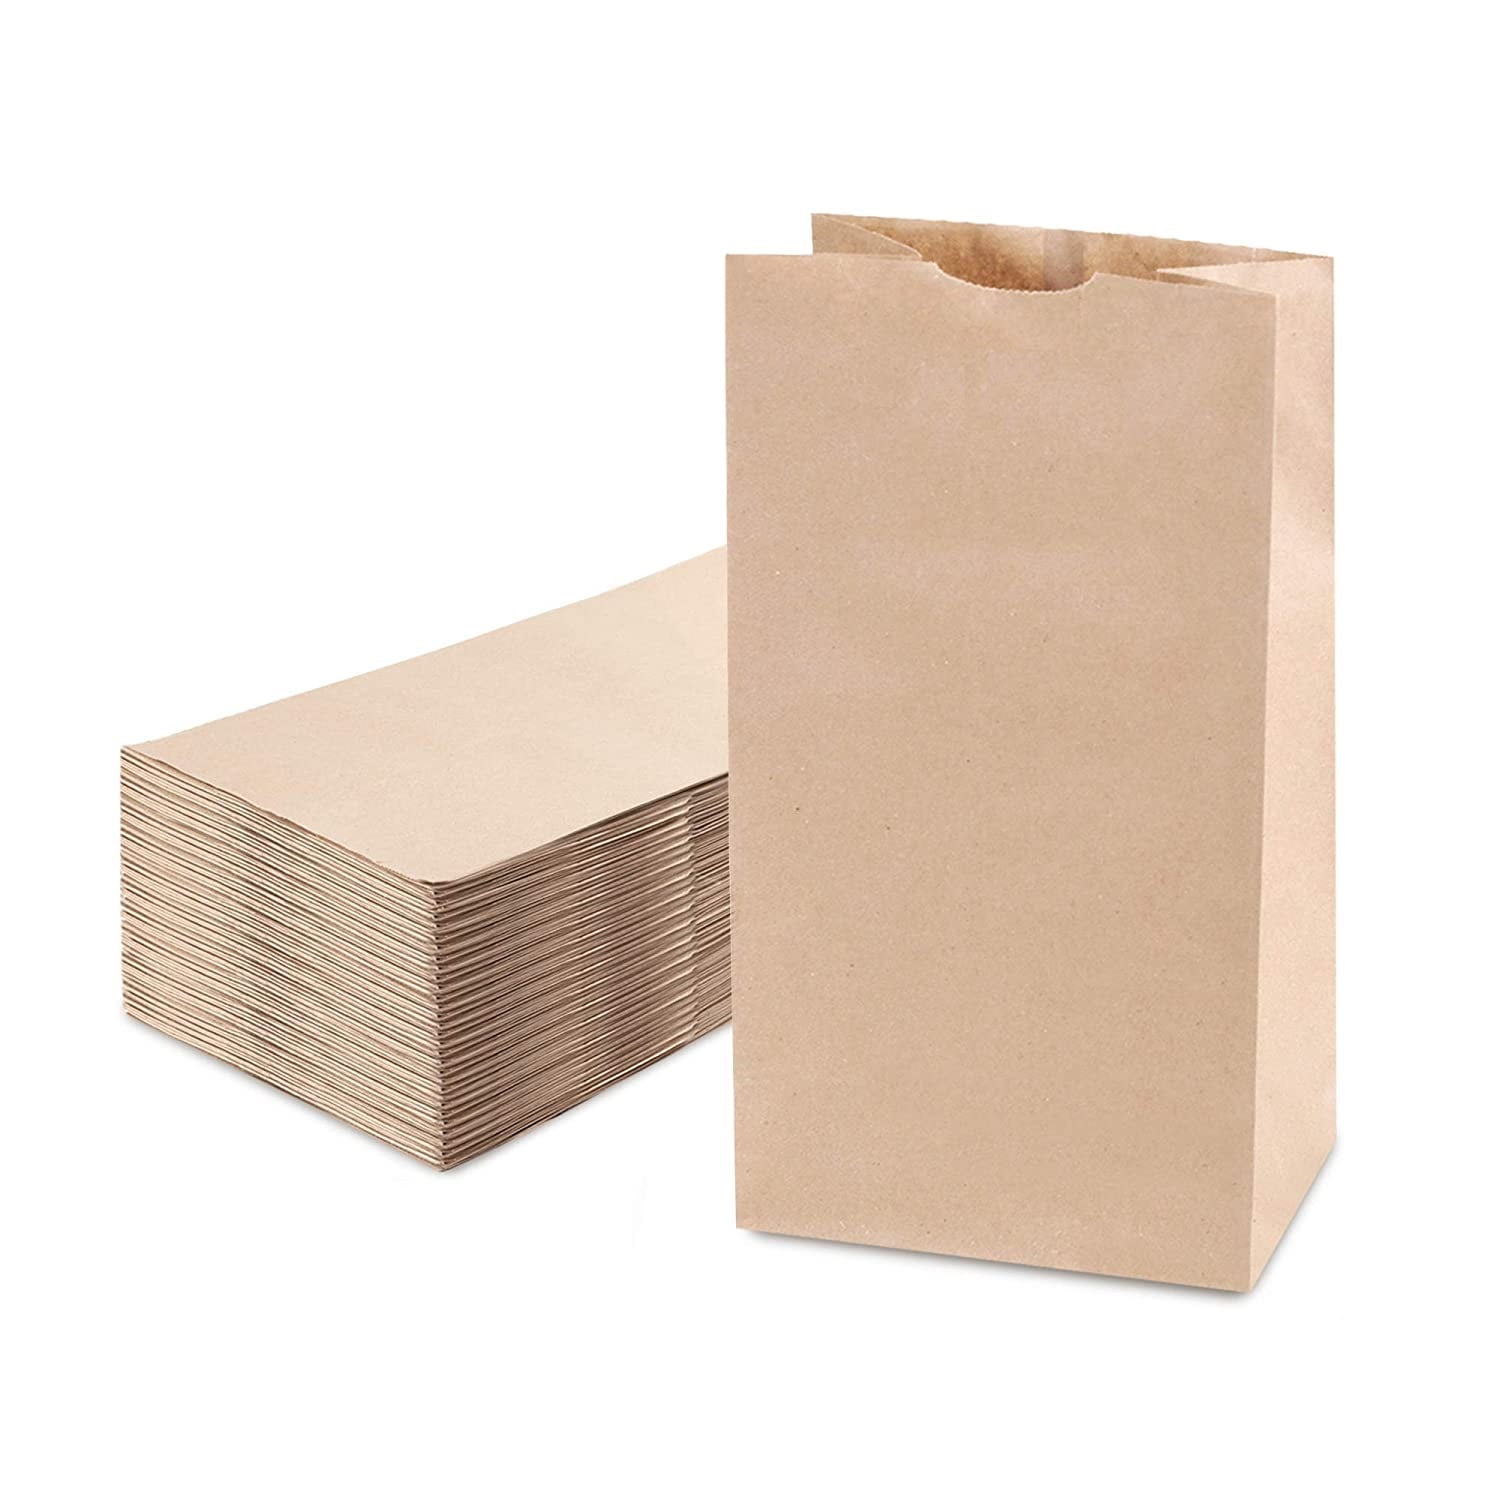 Mr Miracle 4 lb White Paper Bags Pack of 100 Opened Size - 6875 x 35 x 2375 Inches